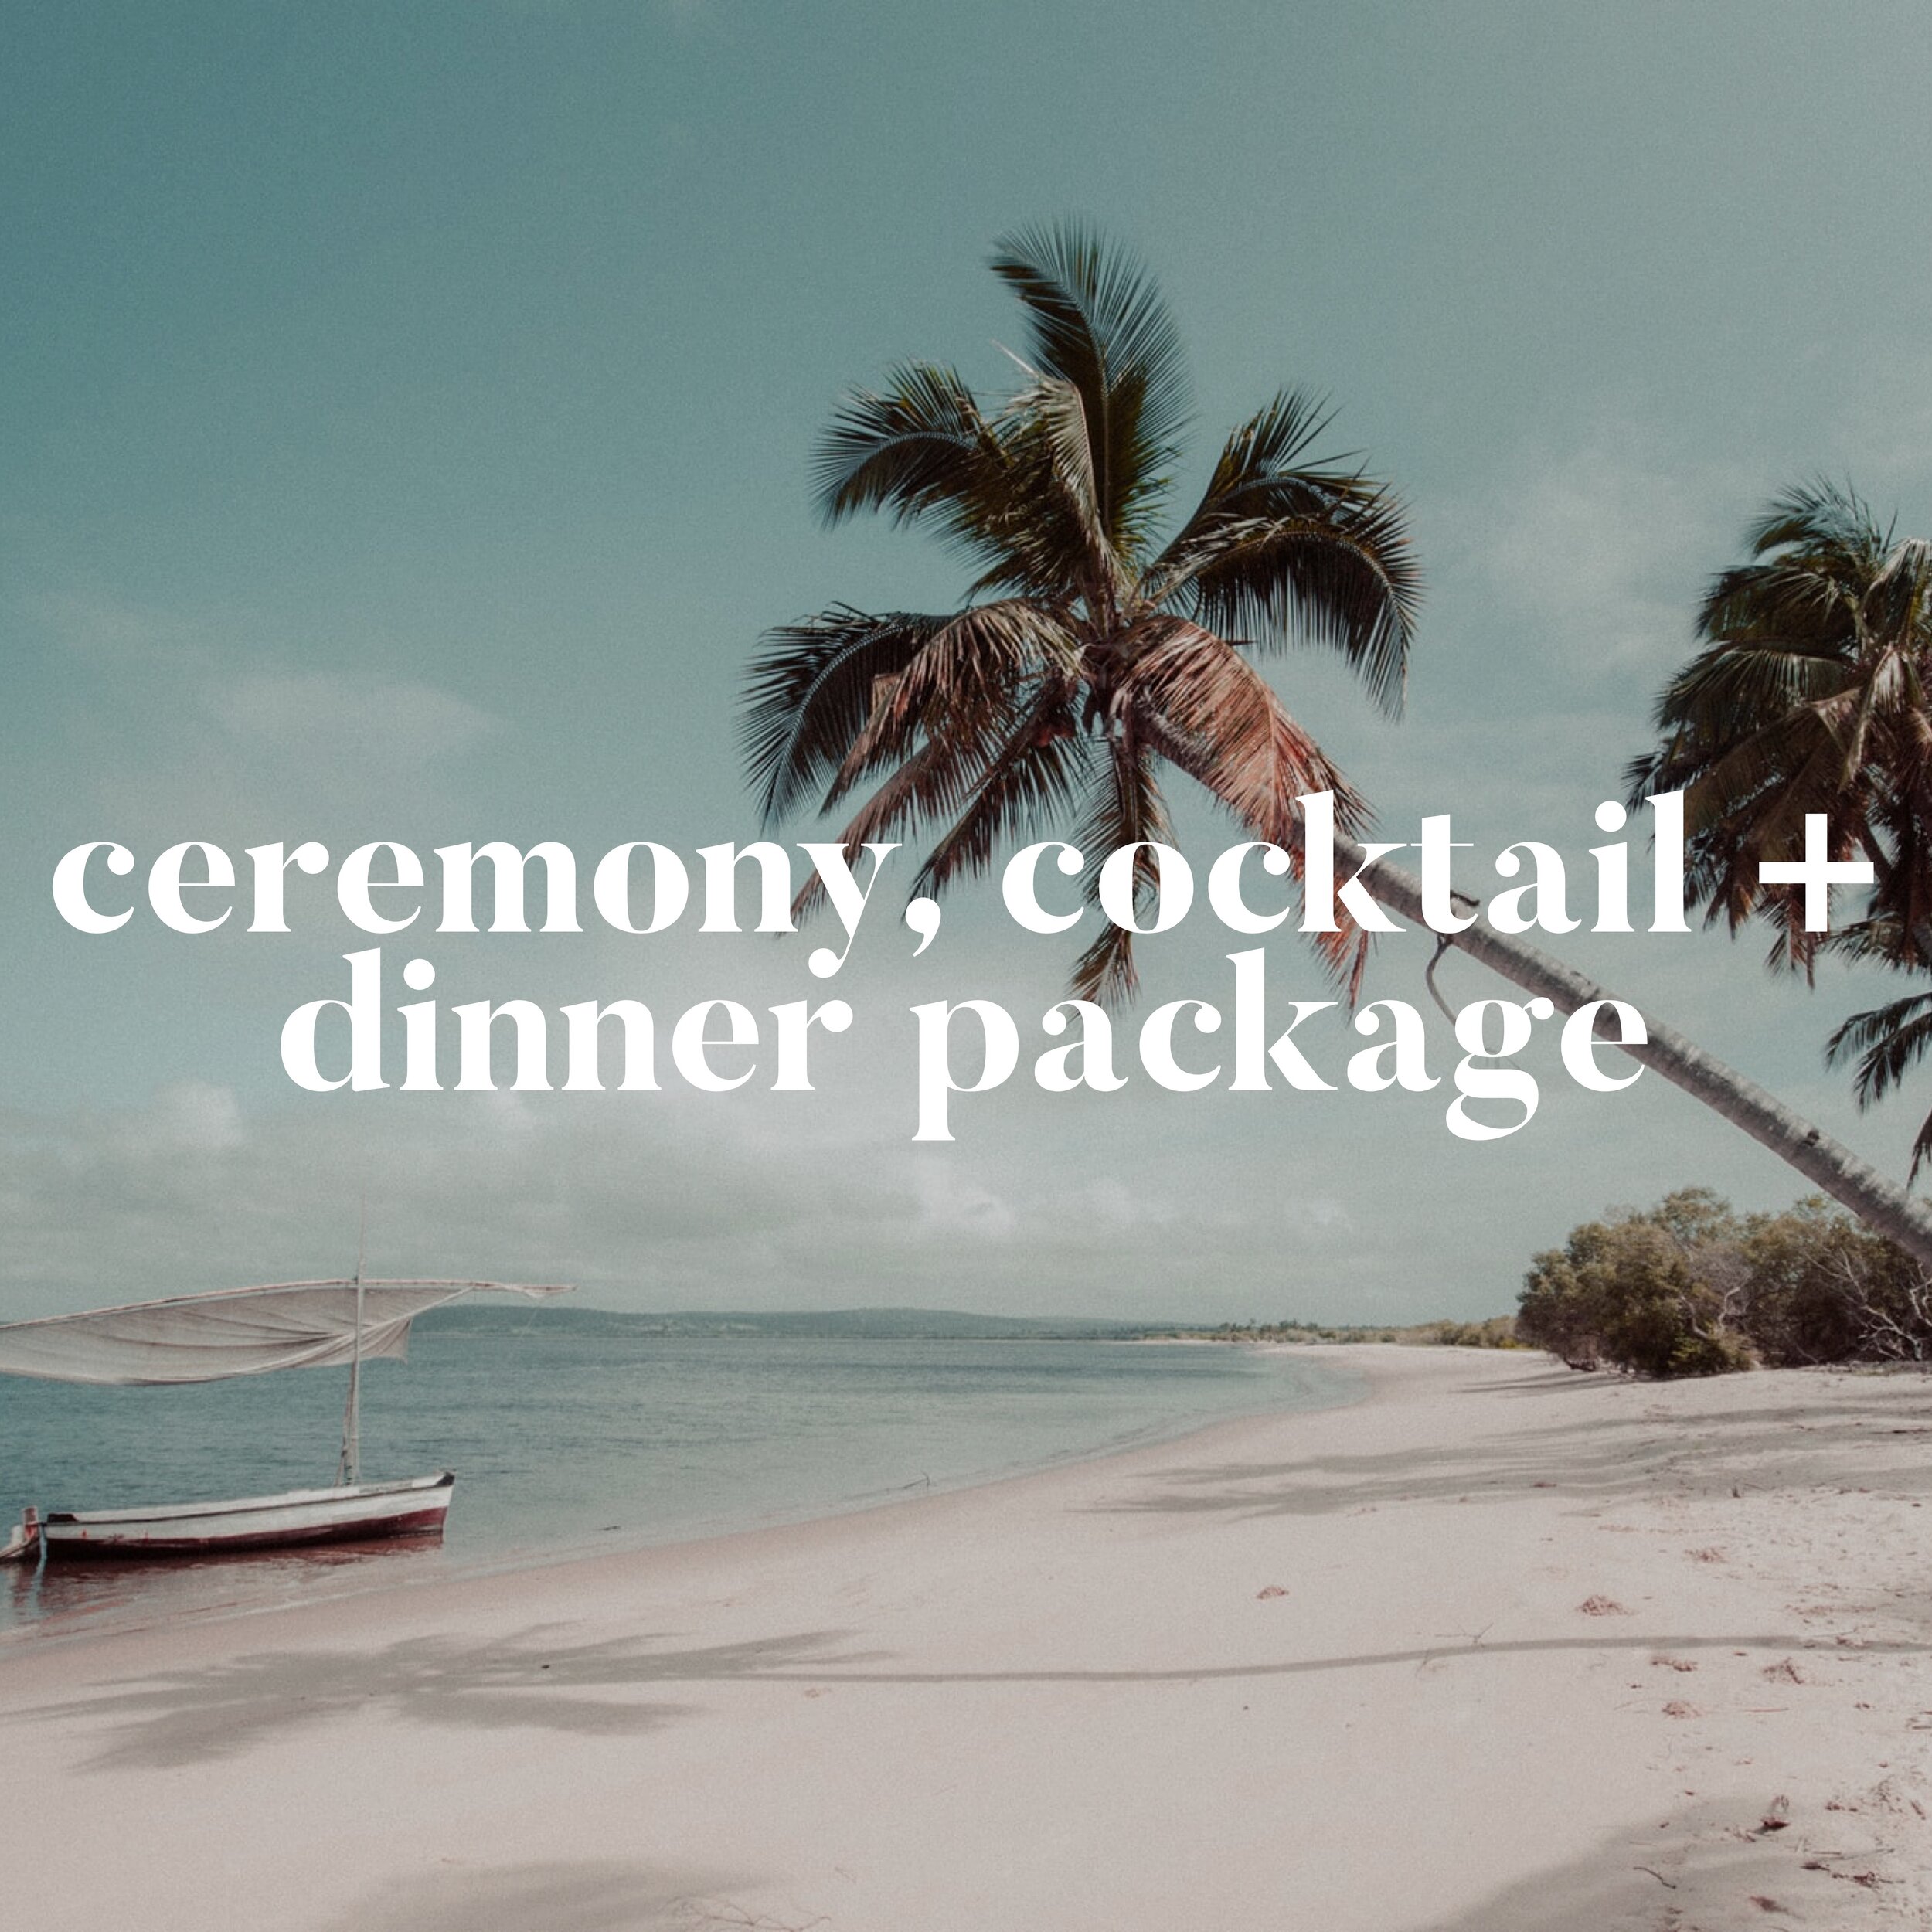 Ceremony, cocktail + dinner package